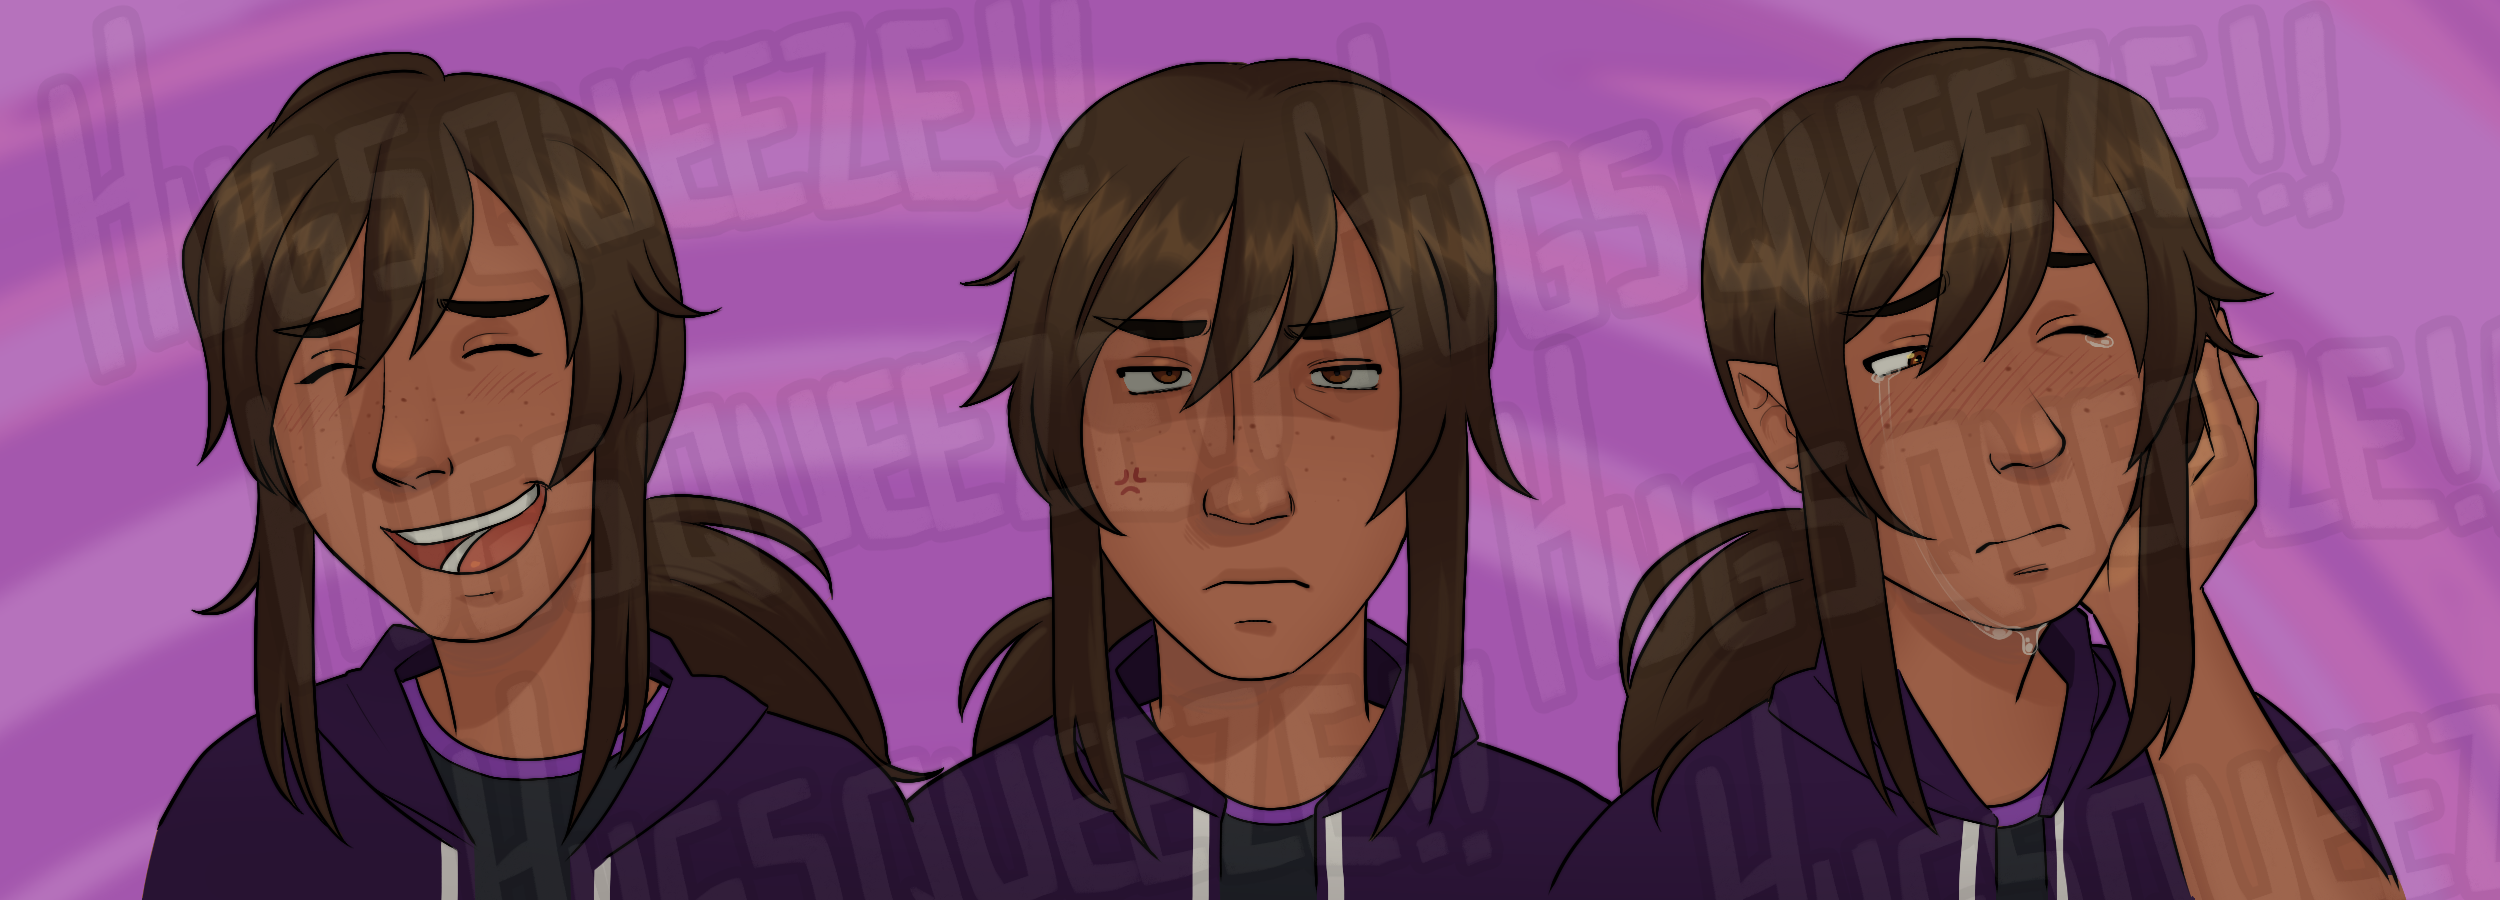 An illustration of three bust shots of a brown skinned character with long hair that has been tyed back into a ponytail. They are wearing a purple jacket over a black tank top. They have amber eyes and freckles spotting across the bridge of their nose and cheeks. In the left-most expression, they are laughing with their eyes closed as they tilt their head slightly to the left. In the middle expression, they are glaring at the viewer with an intense shadow being cast over their eyes. In the right-most expression, they are tearful and crying with one eye closed as they avert their gaze to the right. With their left hand, they wipe at their tears.